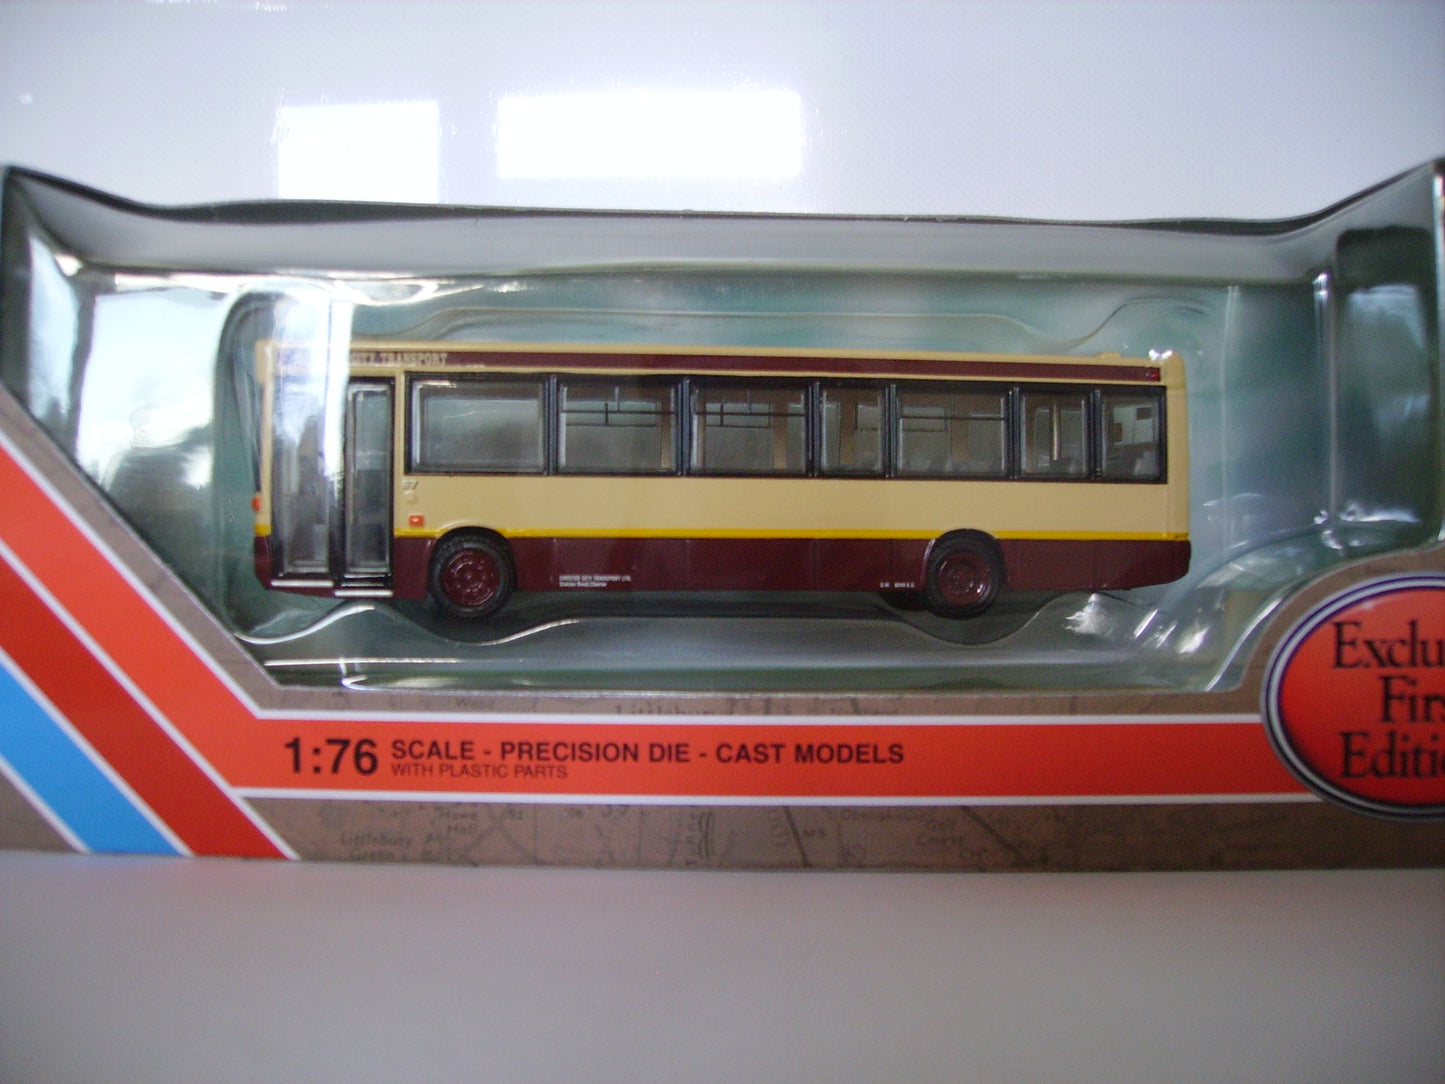 20629 Plaxton Pointer Dart "Chester City" Route 18